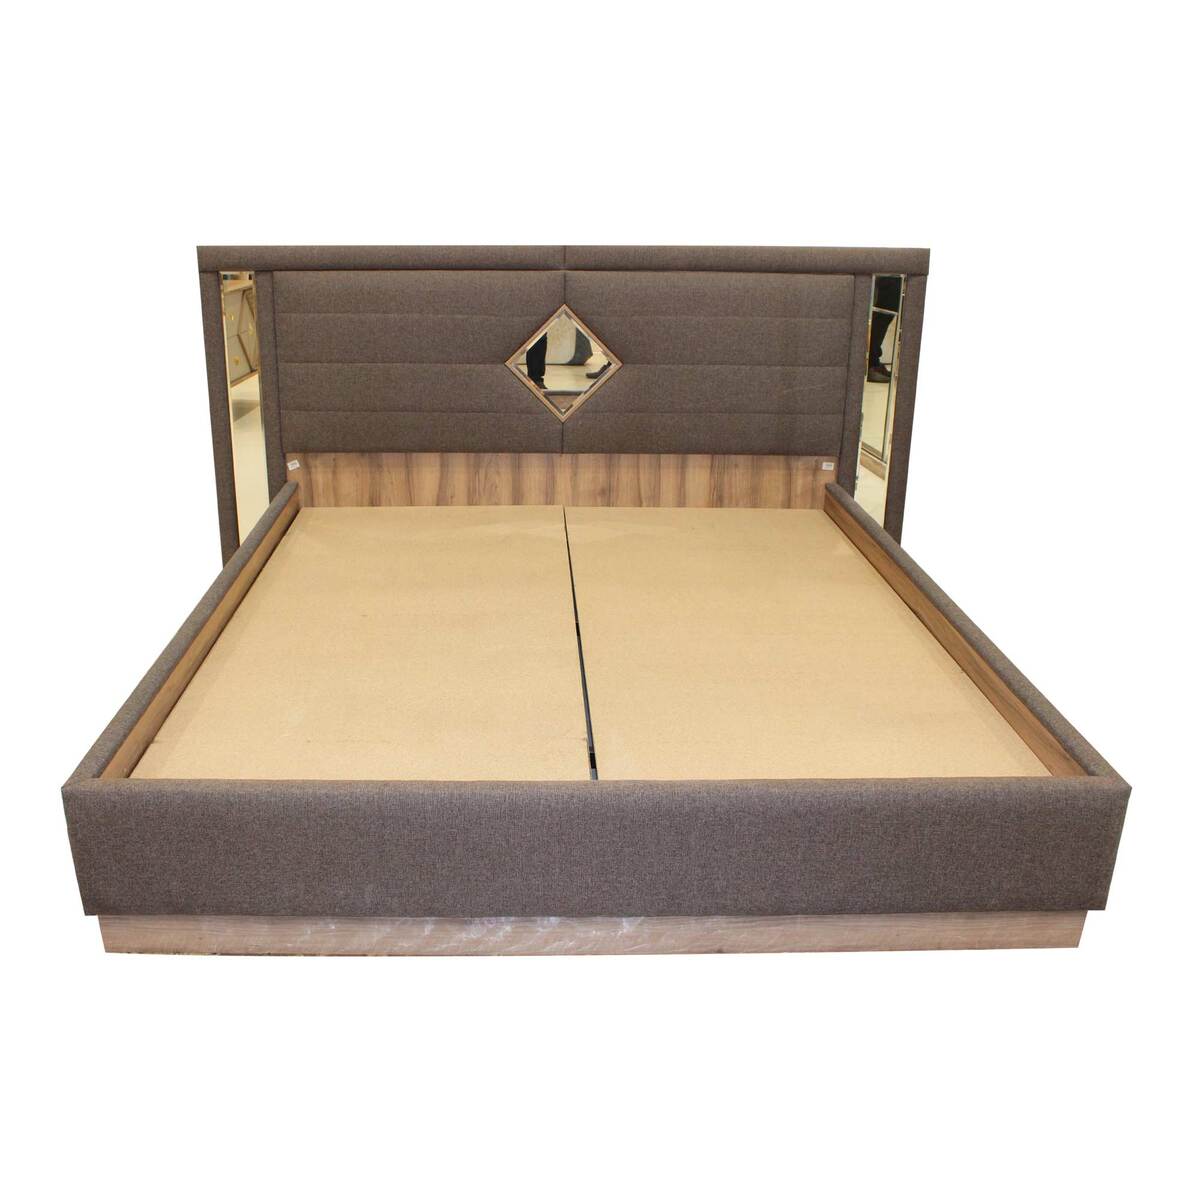 Maple Leaf Bed Cot-Everest,Made In Turkey